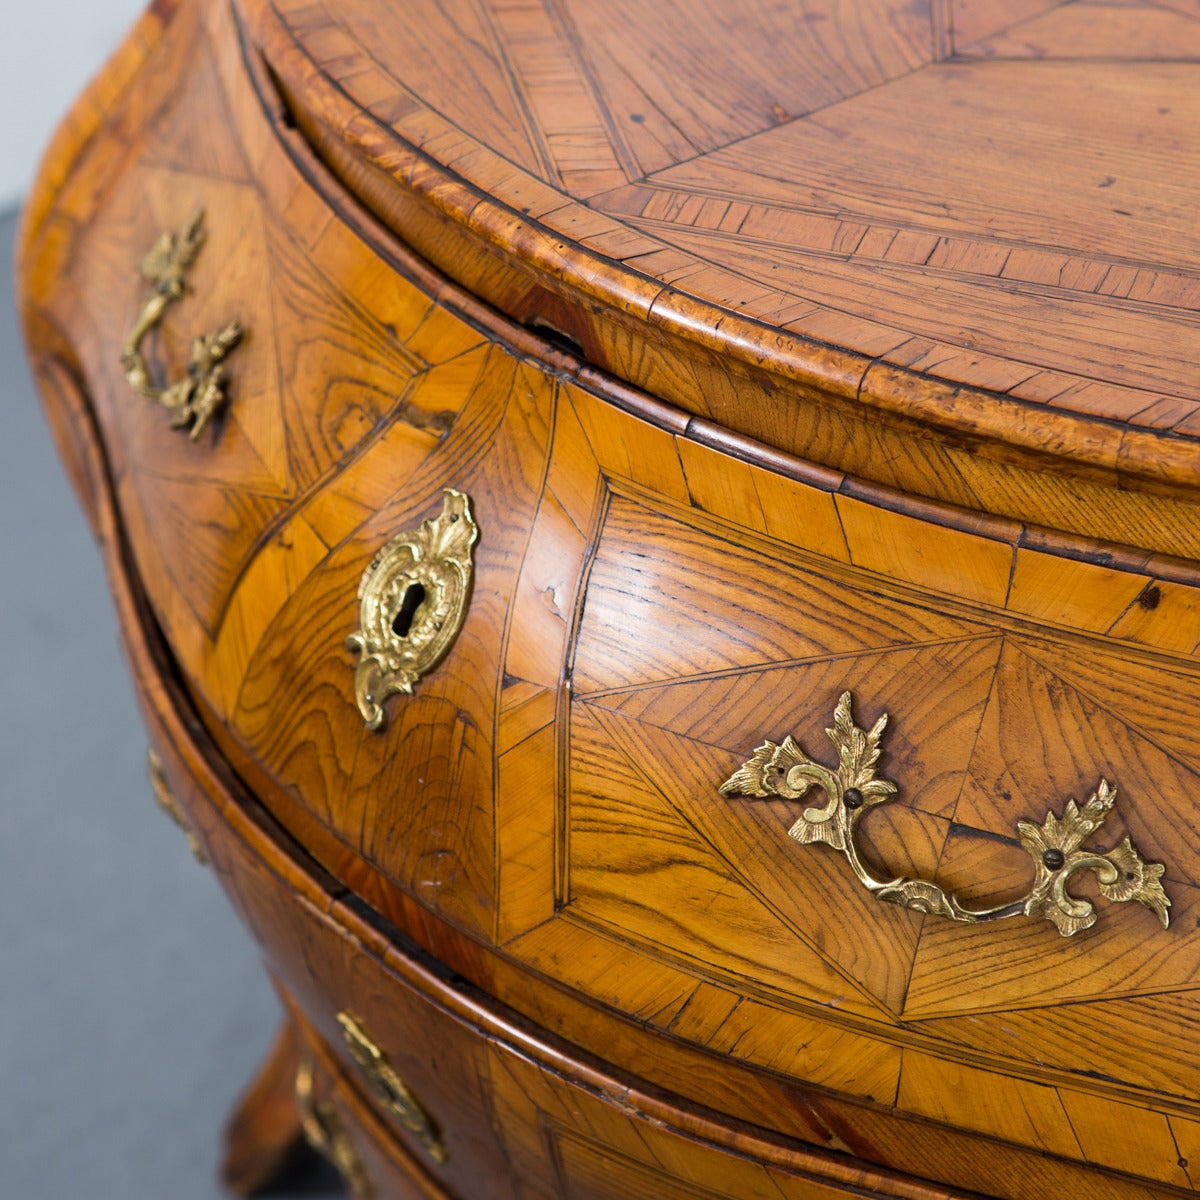 Ches Swedish Rococo Period  18th Century Sweden. A gorgeous chest of drawers made during the Rococo period 1750-1775 in Sweden. Incredible veneer and inlays in geometric patterns. Original condition. Original brass hardware and locks.